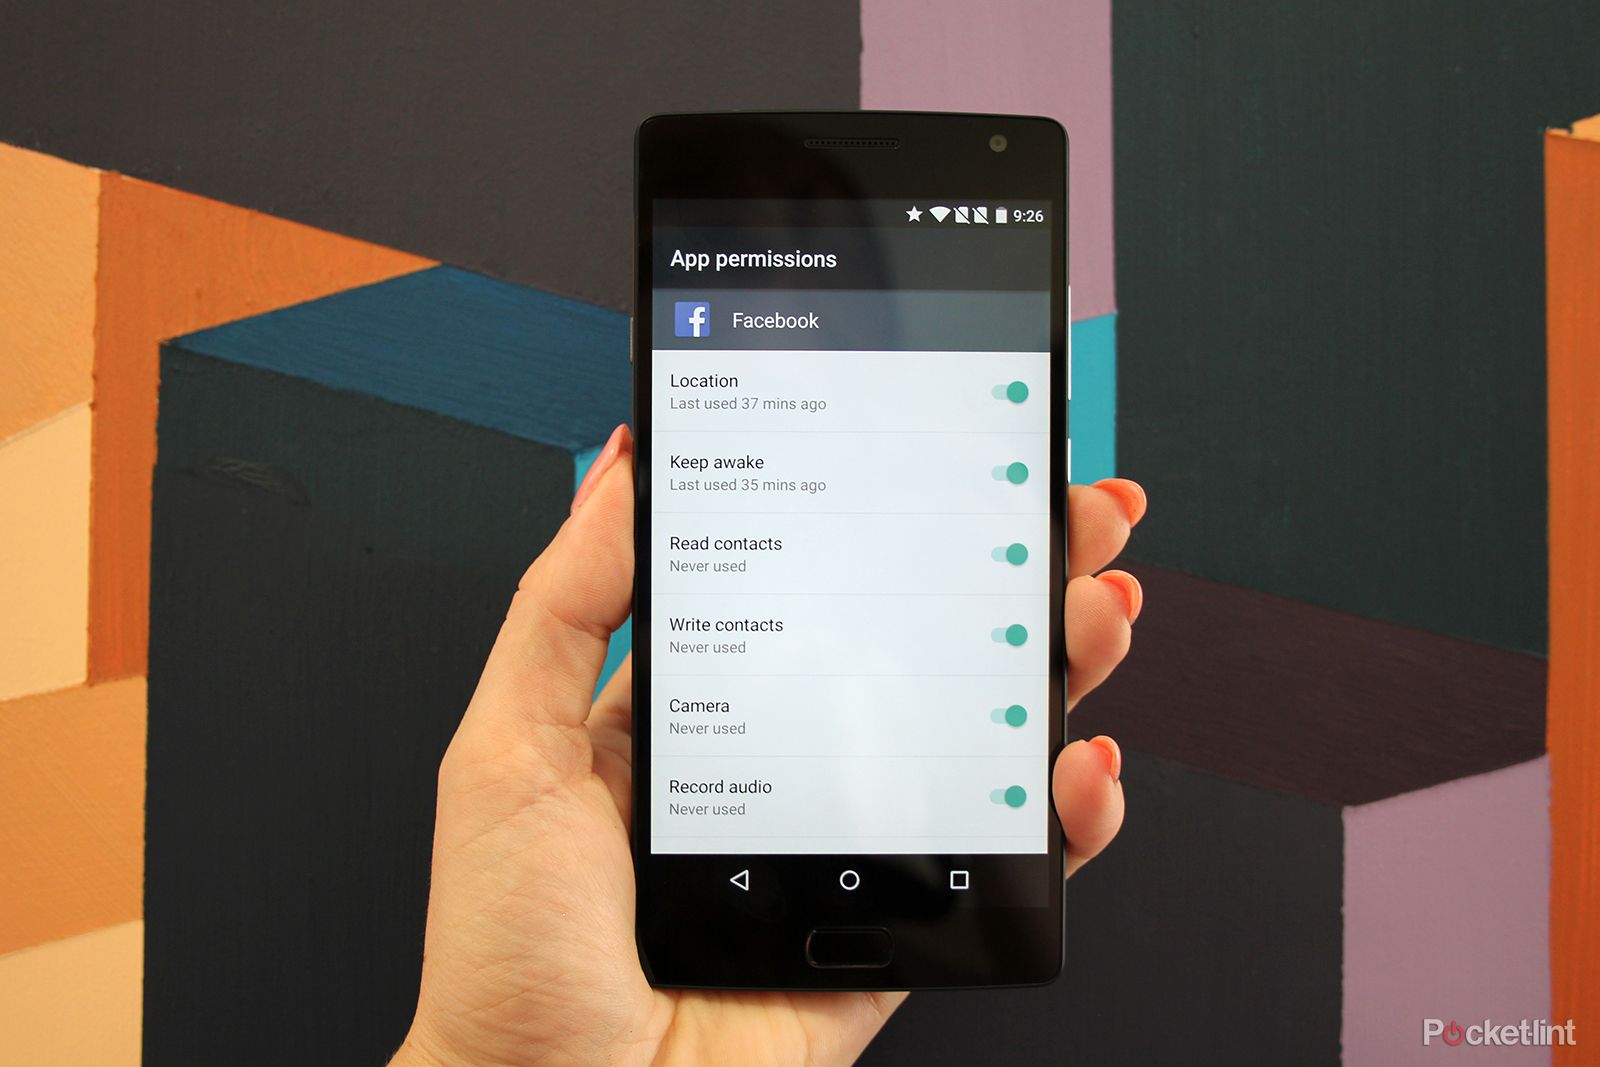 oneplus 2 and oneplus x software 7 features you must check out on oxygenos image 17